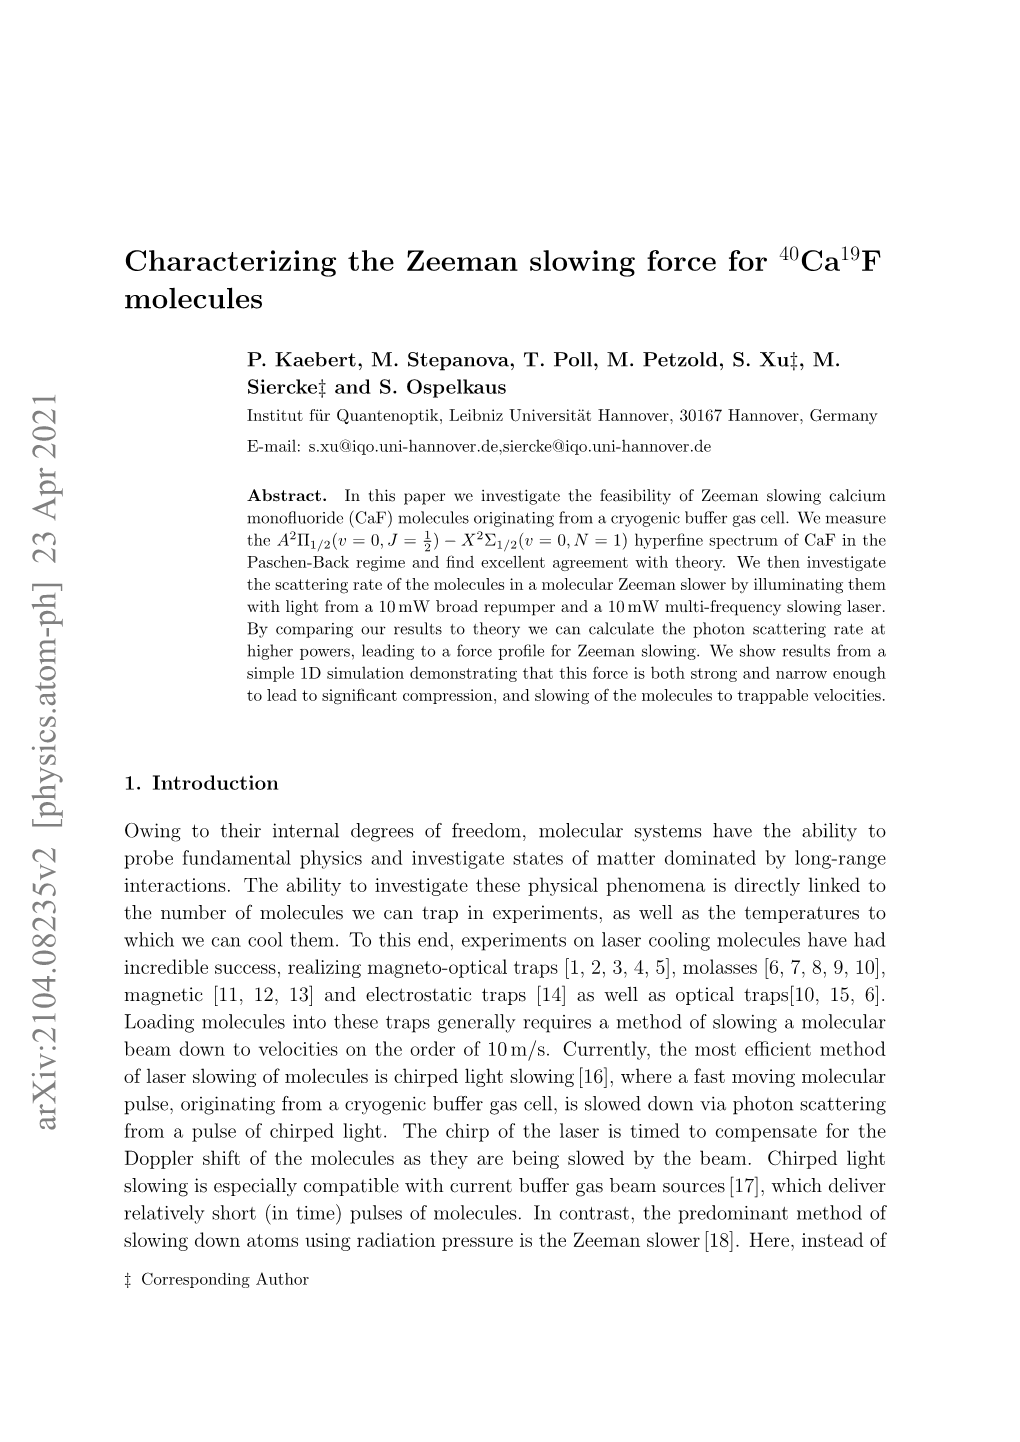 Characterizing the Zeeman Slowing Force for 40Ca19f Molecules